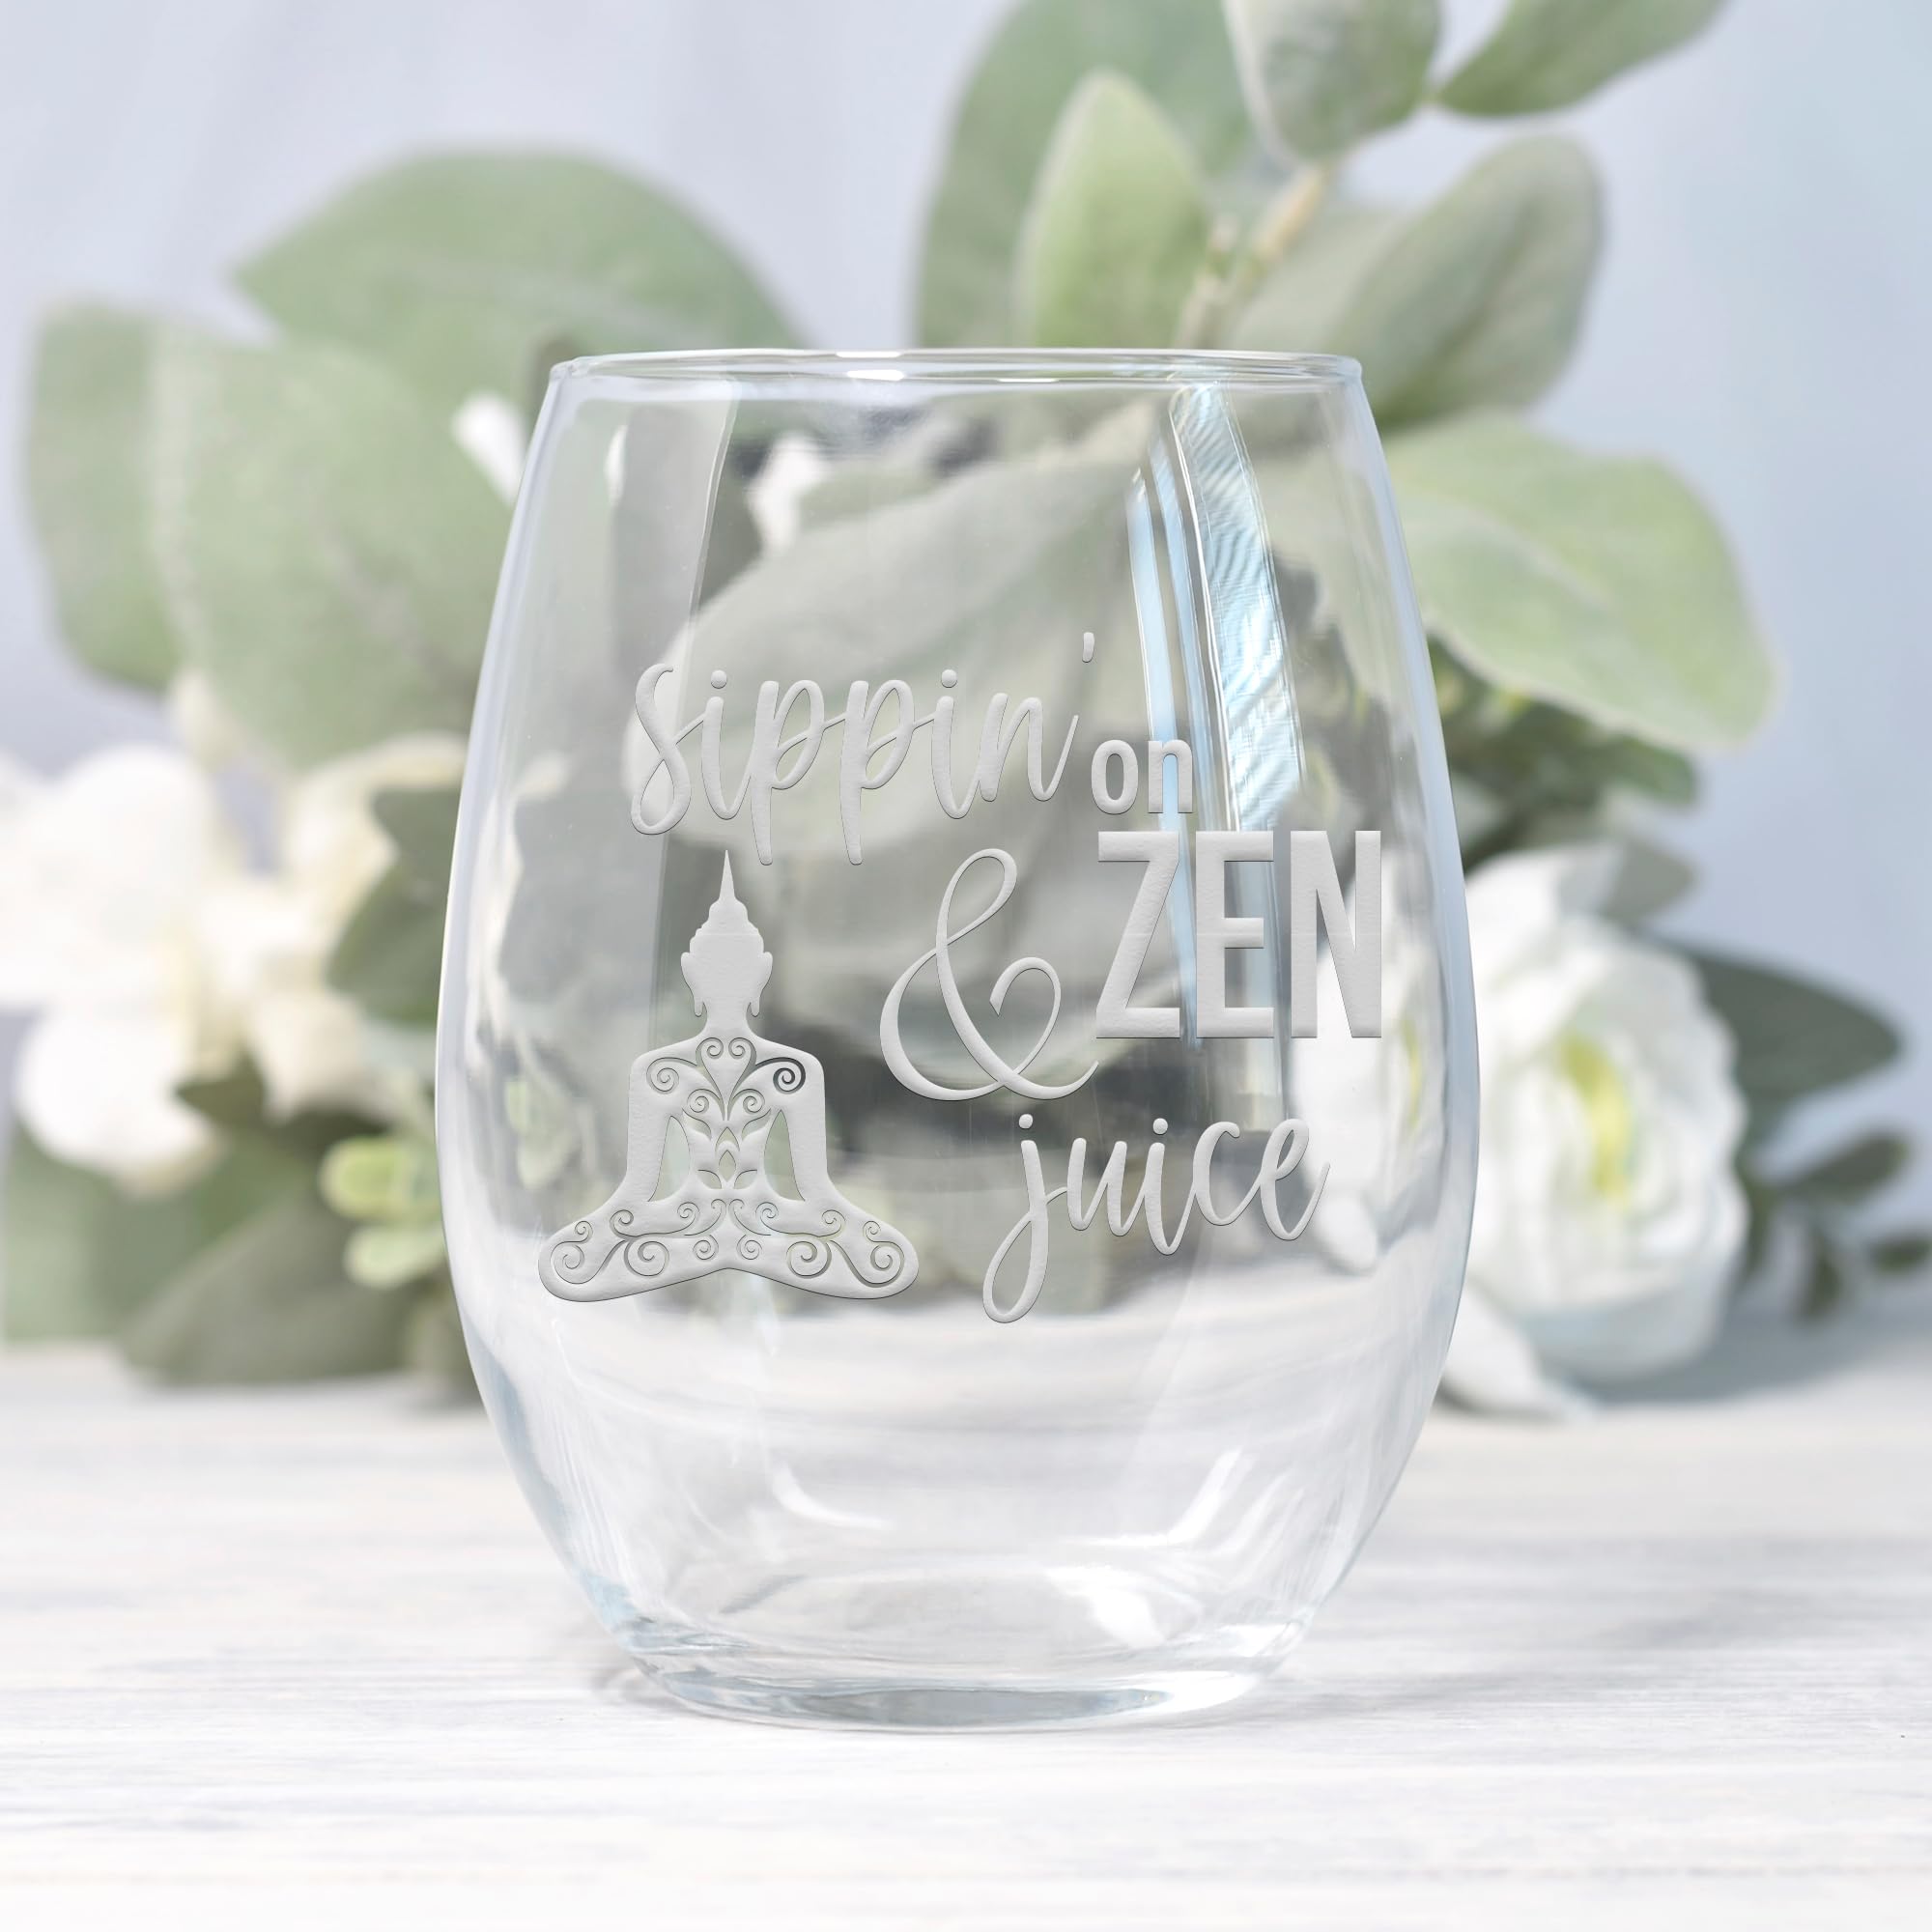 Sippin on Zen and Juice Yoga Stemless Wine Glass - Yoga Gift, Namaste, Gift For Relaxation, Pun Gift, Wine Lover, Her, Mother, Best Friend Gift, Music Gift